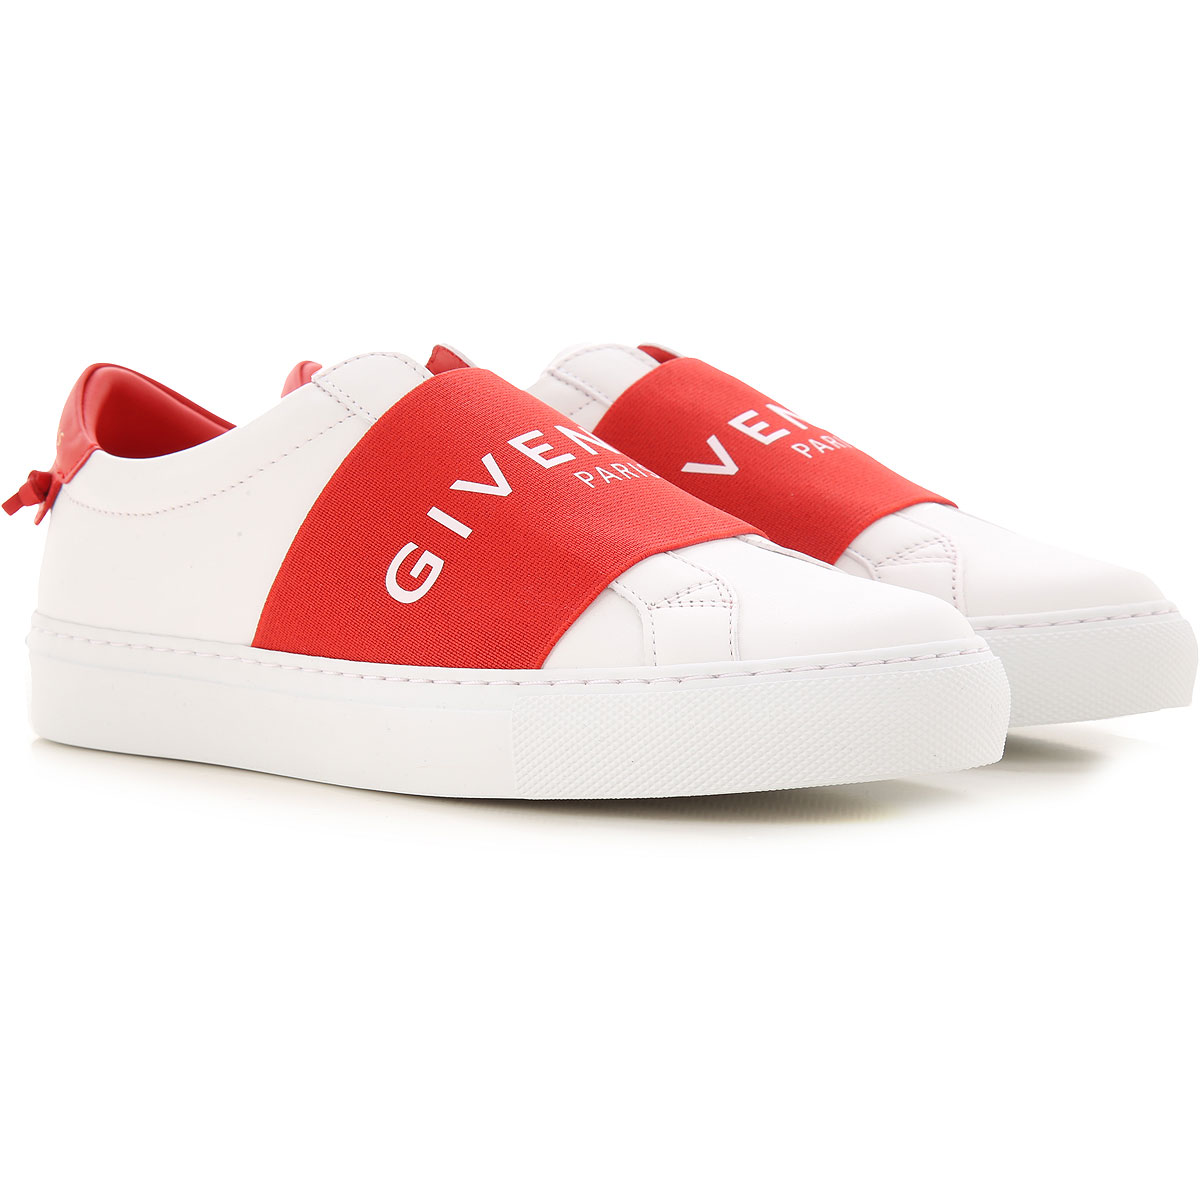 givenchy sneakers 2019